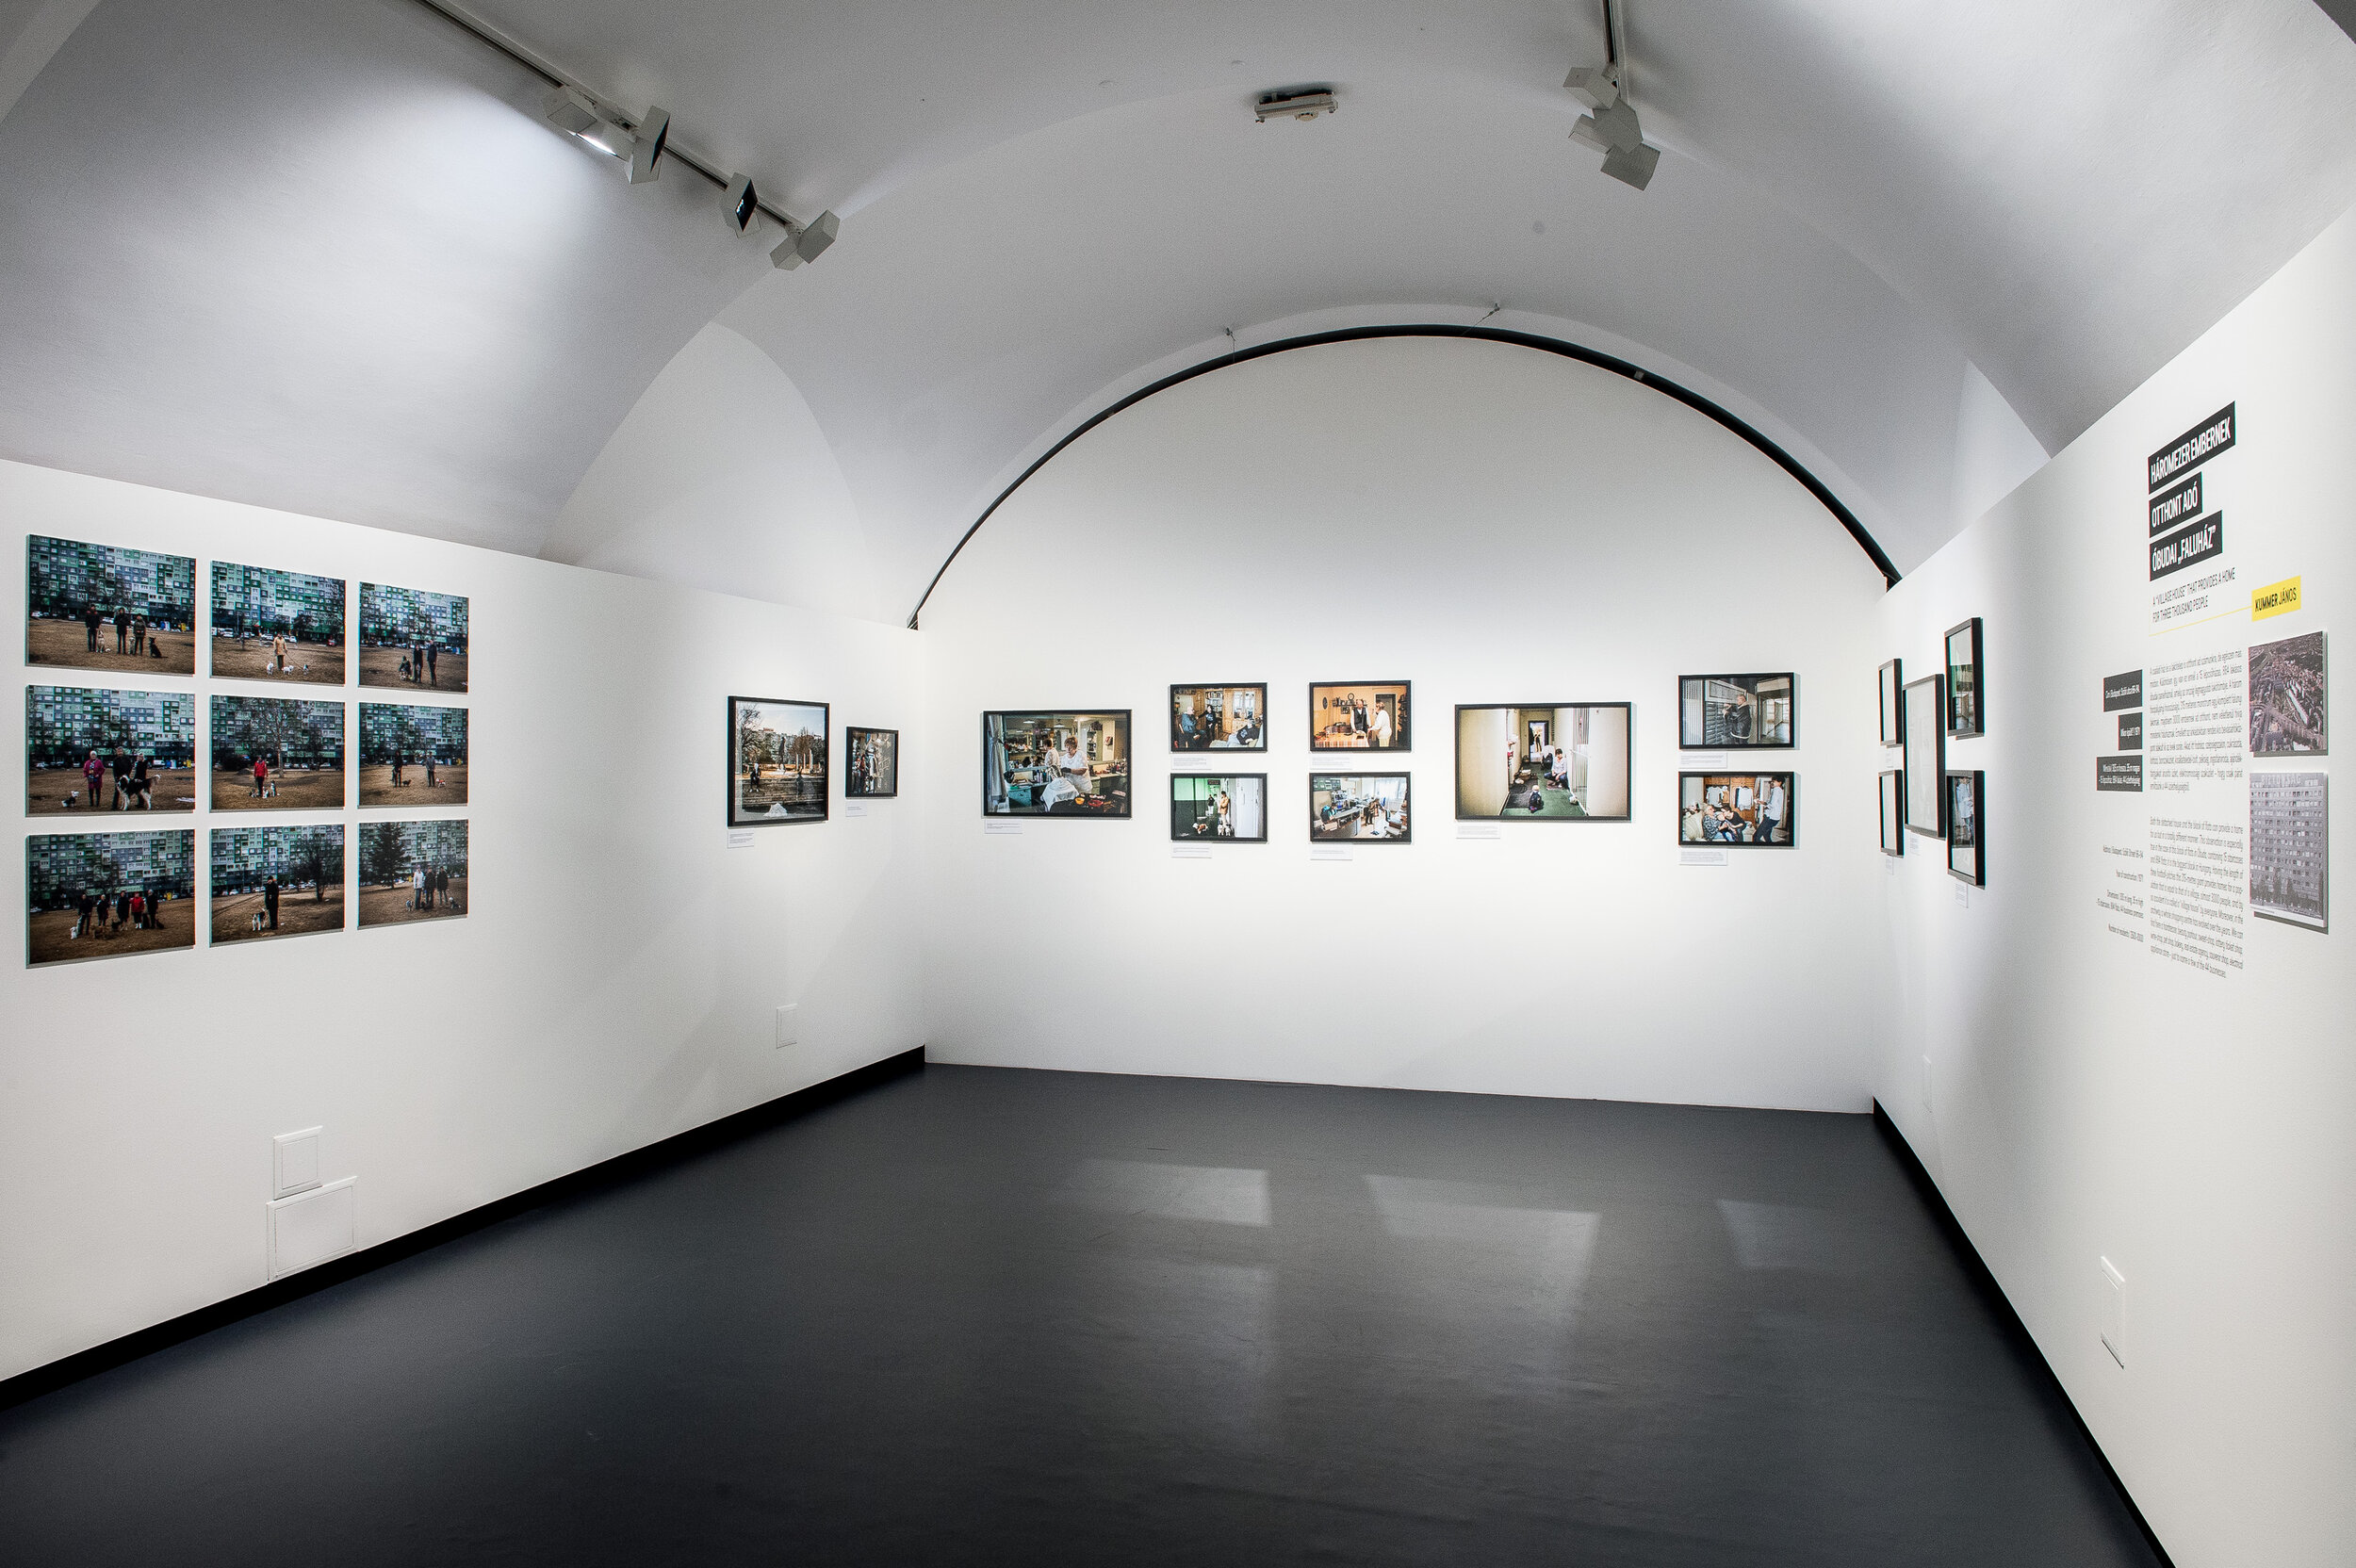  Enterior photo of the exhibition of the “A Shared House” curated by Istvan Viragvolgyi. Vertical village was part of the seven houses in seven picture stories in the photo exhibition of the Pannonhalma Archabbey. Photo taken by Sandor Ujvari 